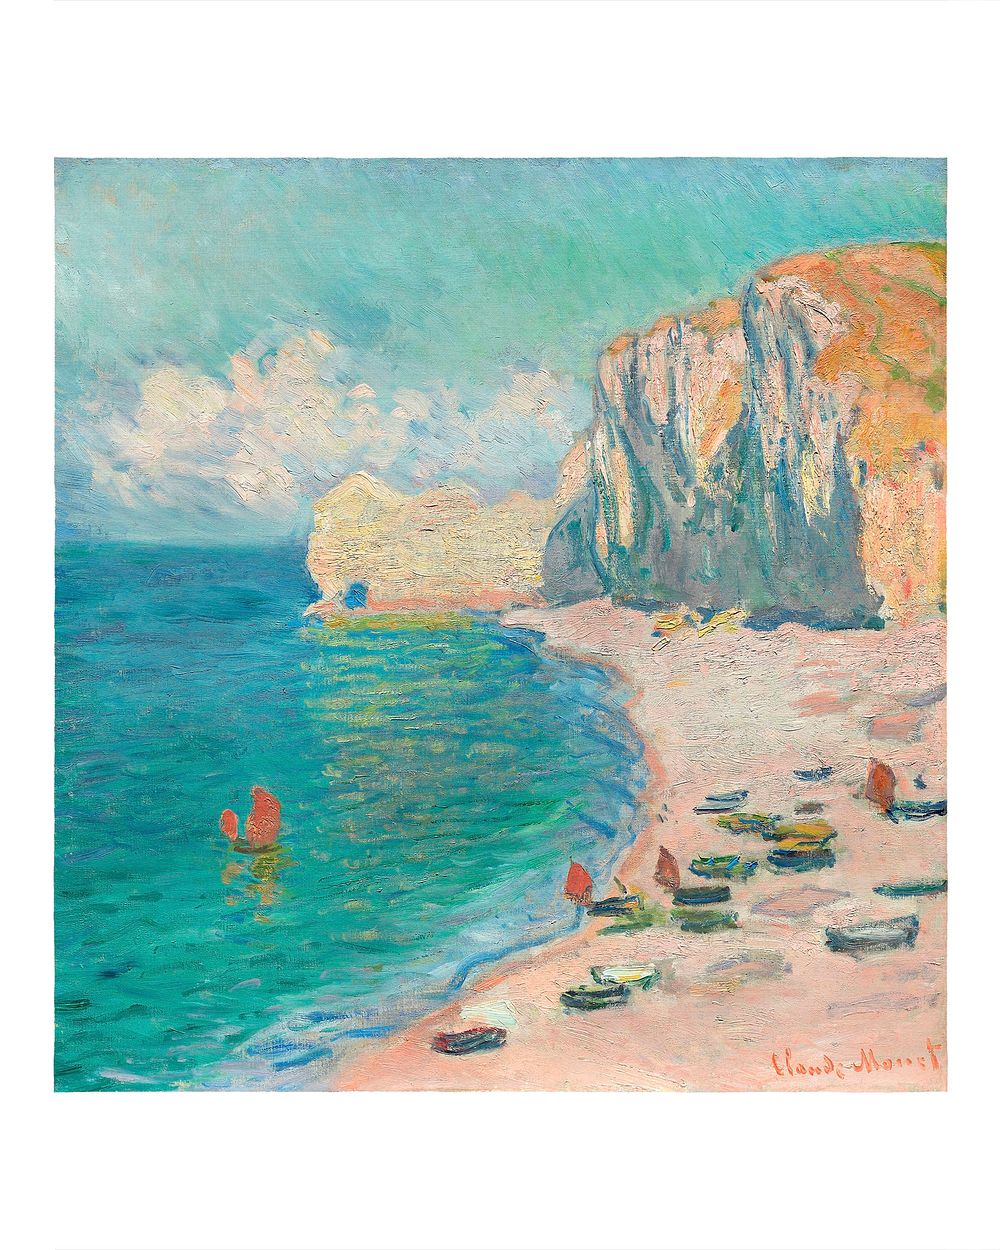 The Beach and the Falaise d'Amont (1885) by Claude Monet.